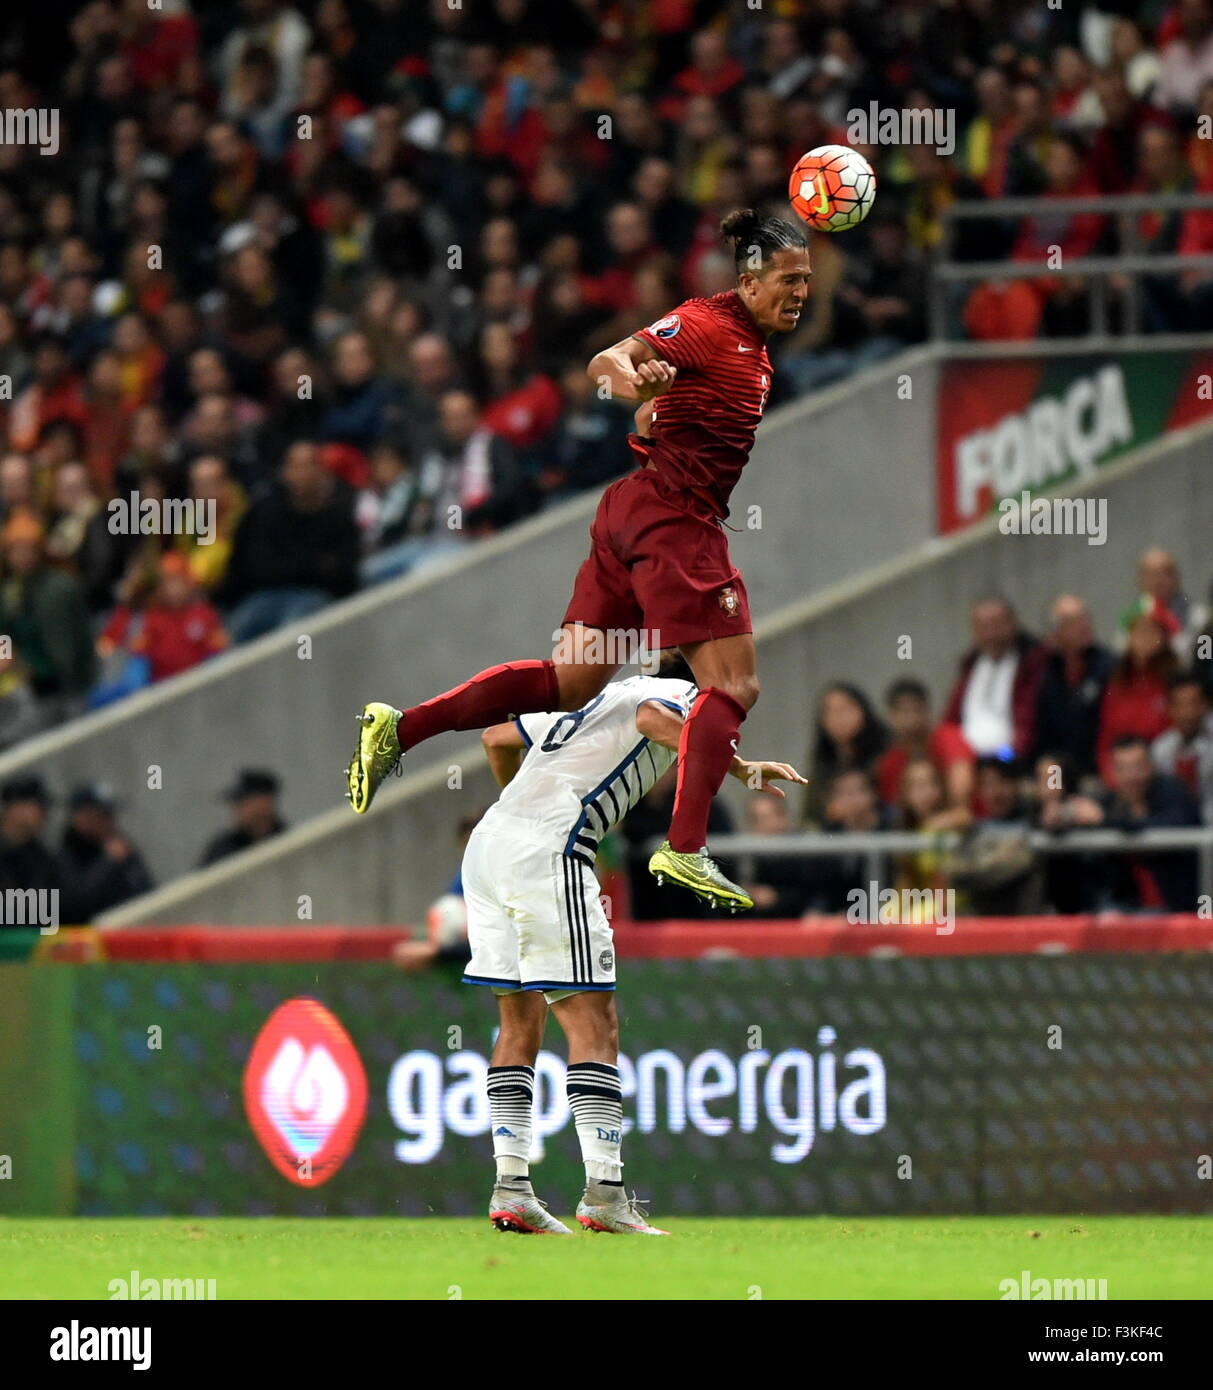 Braga, Portugal. 8th Oct, 2015. Portugal's Bruno Alves (Top) competes during the Euro 2016 qualifying football match between Portugal and Denmark in Braga, Portugal, on Oct. 8, 2015. Portugal won 1-0. © Zhang Liyun/Xinhua/Alamy Live News Stock Photo